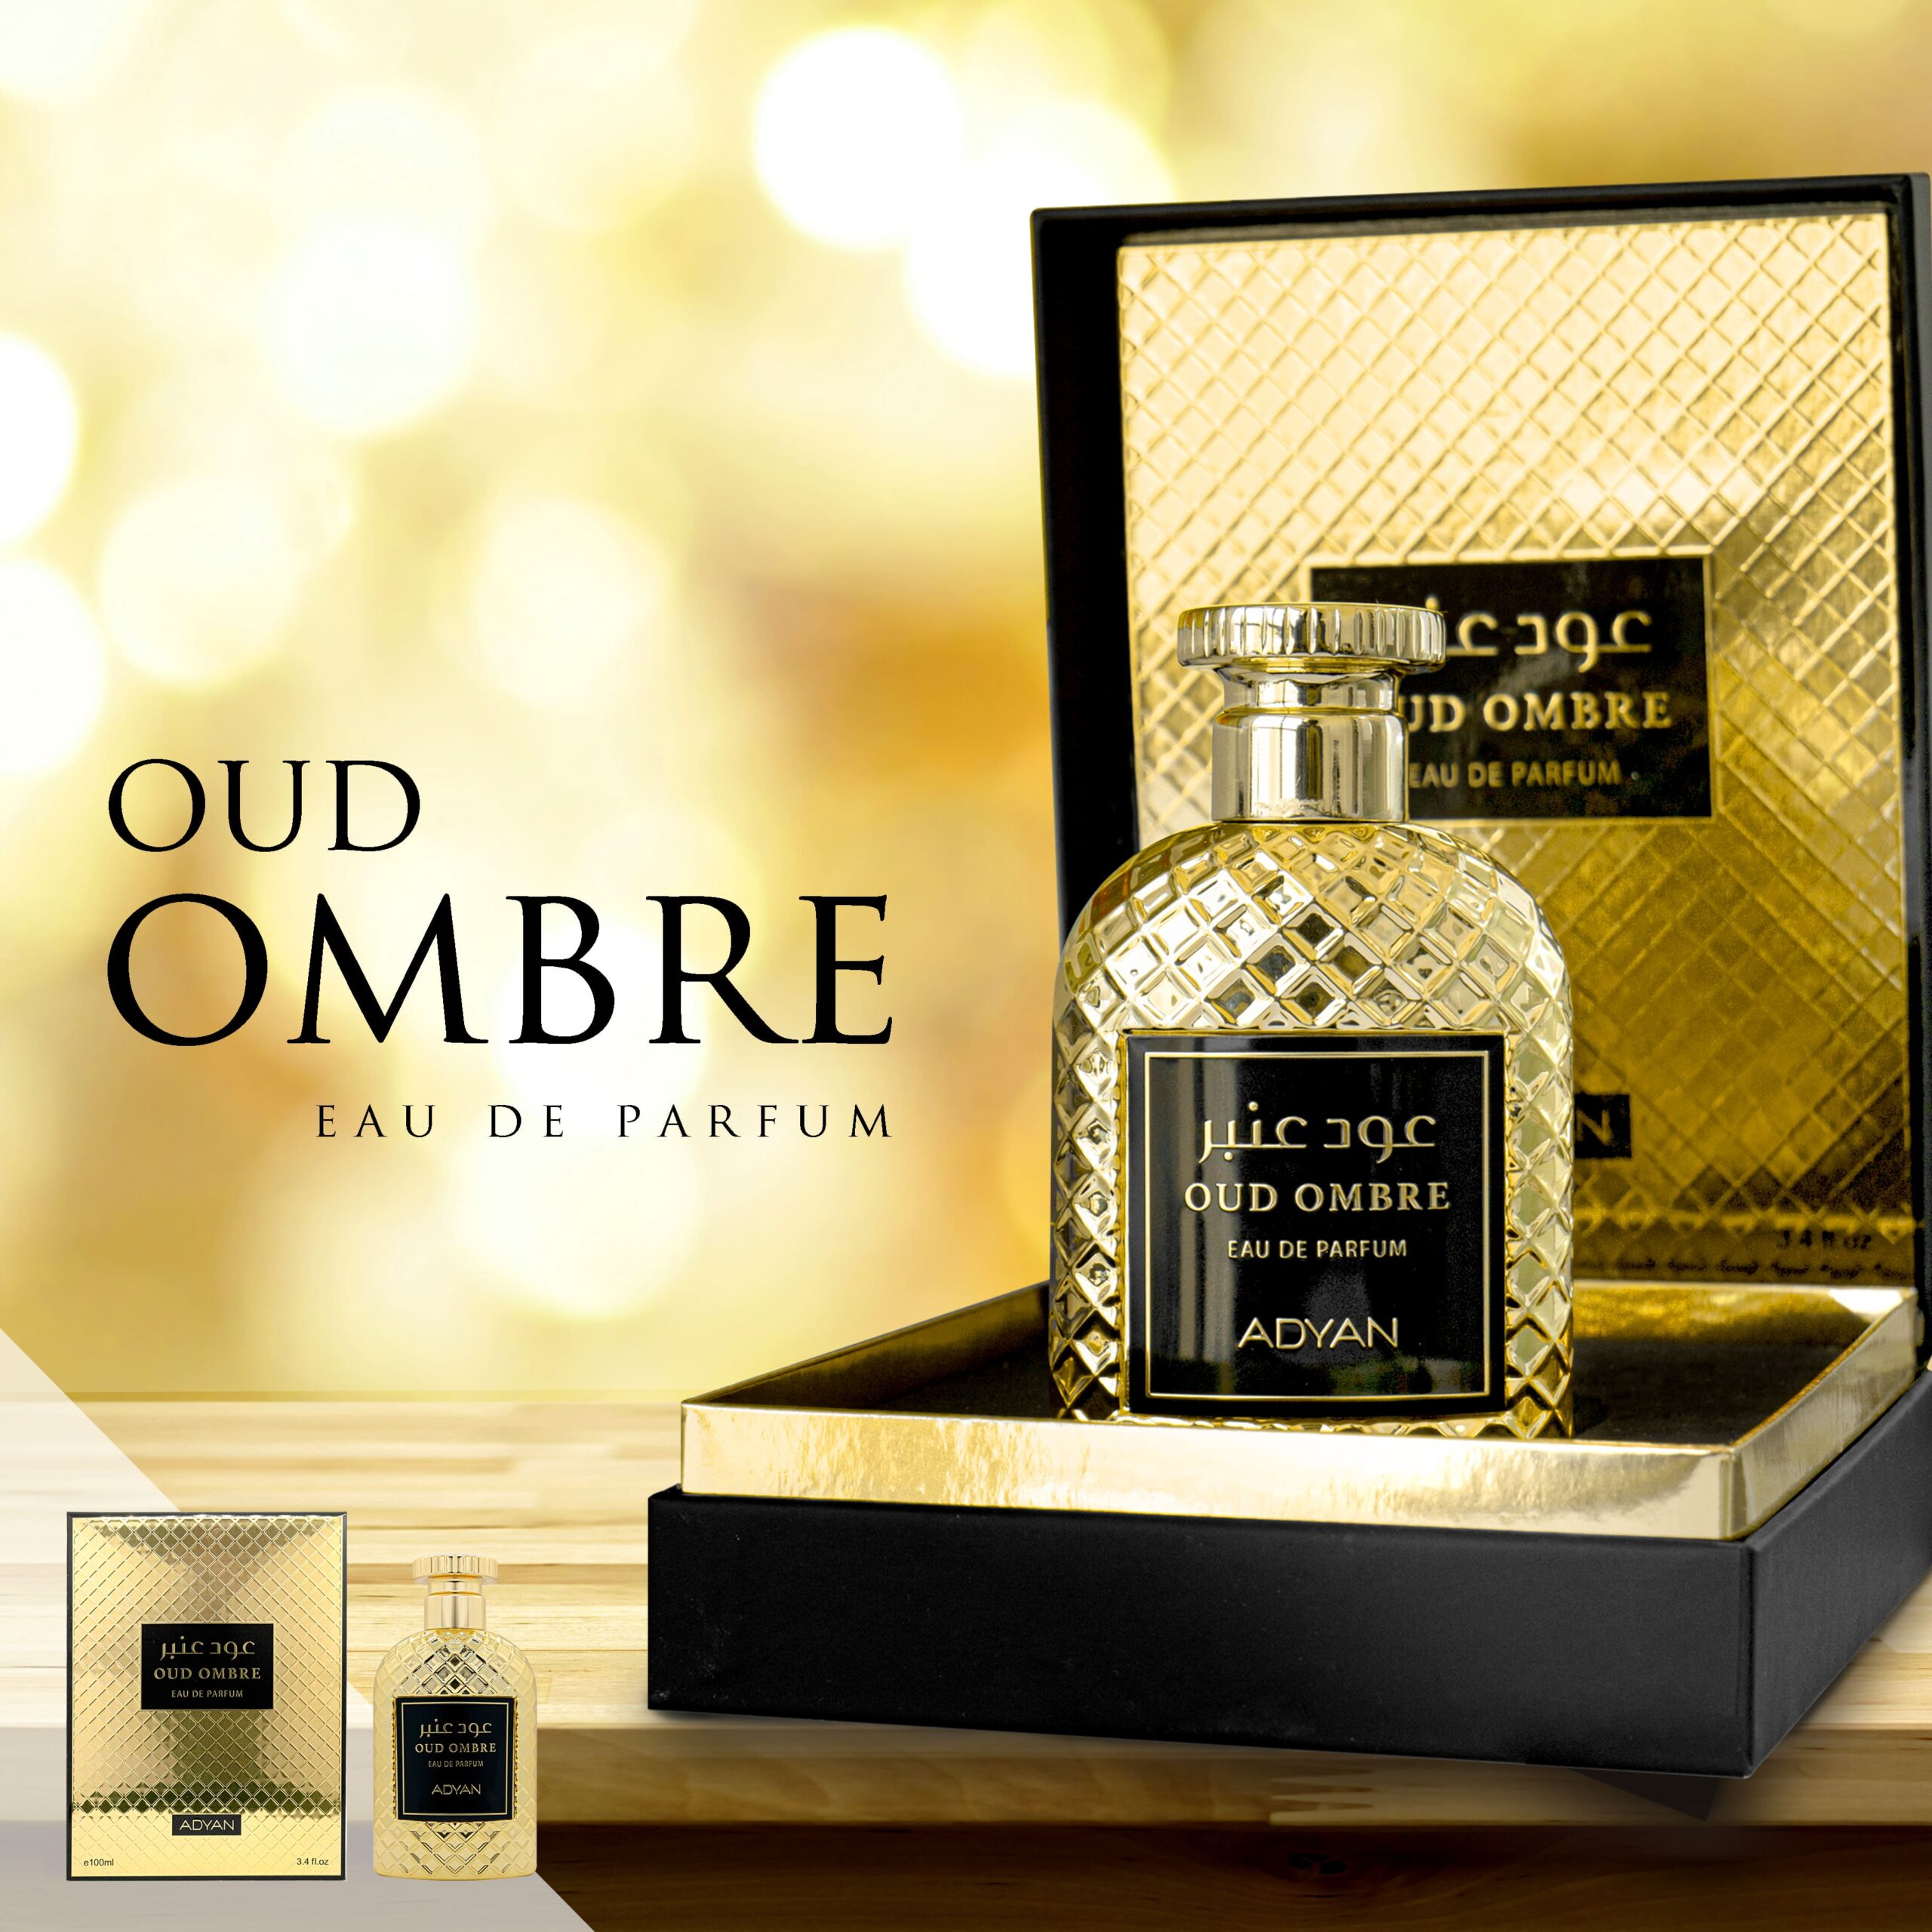 Oud Ombre